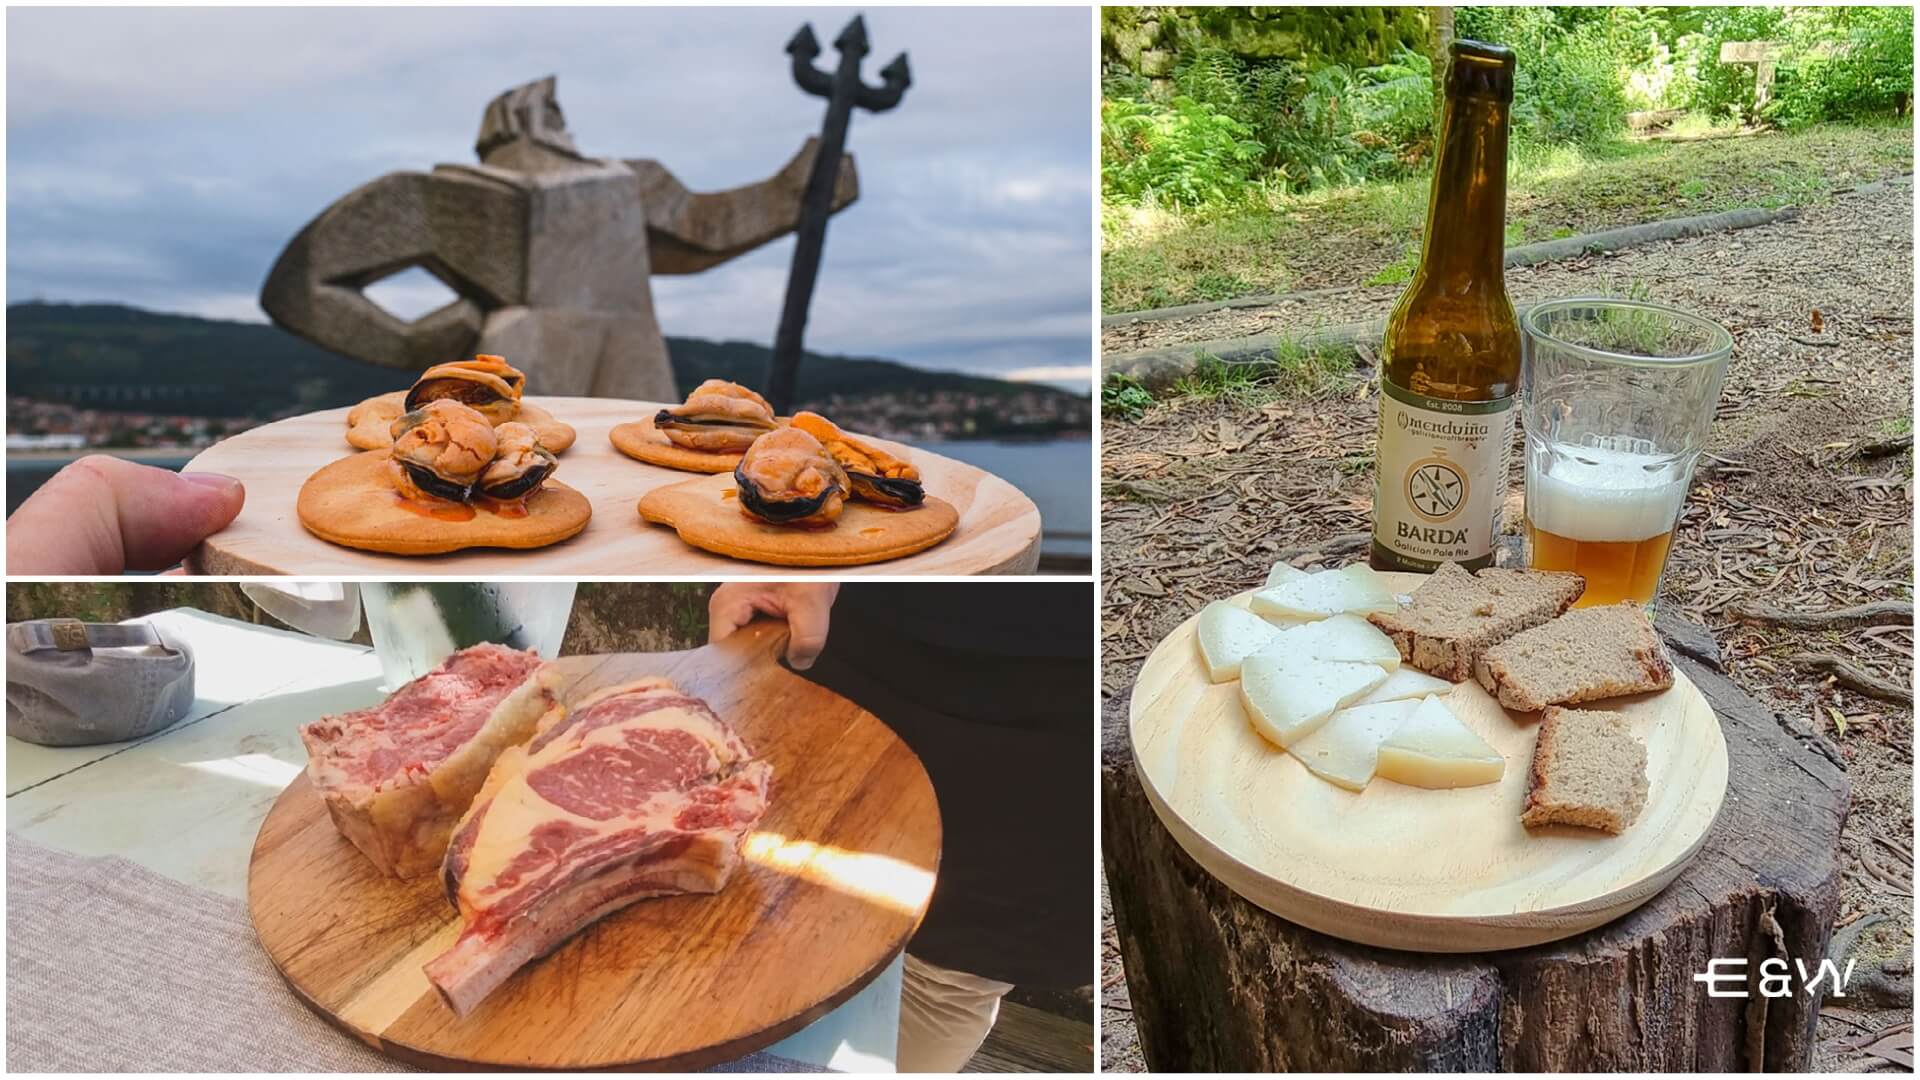 Top 8 Things to do in Moaña, Galicia, Spain - 4. Taste the Delicacy of the Town: Mussels of Moaña, Chuletón (T-Bone Steak) de Moaña, Prize-winning Goat Cheeses, etc...